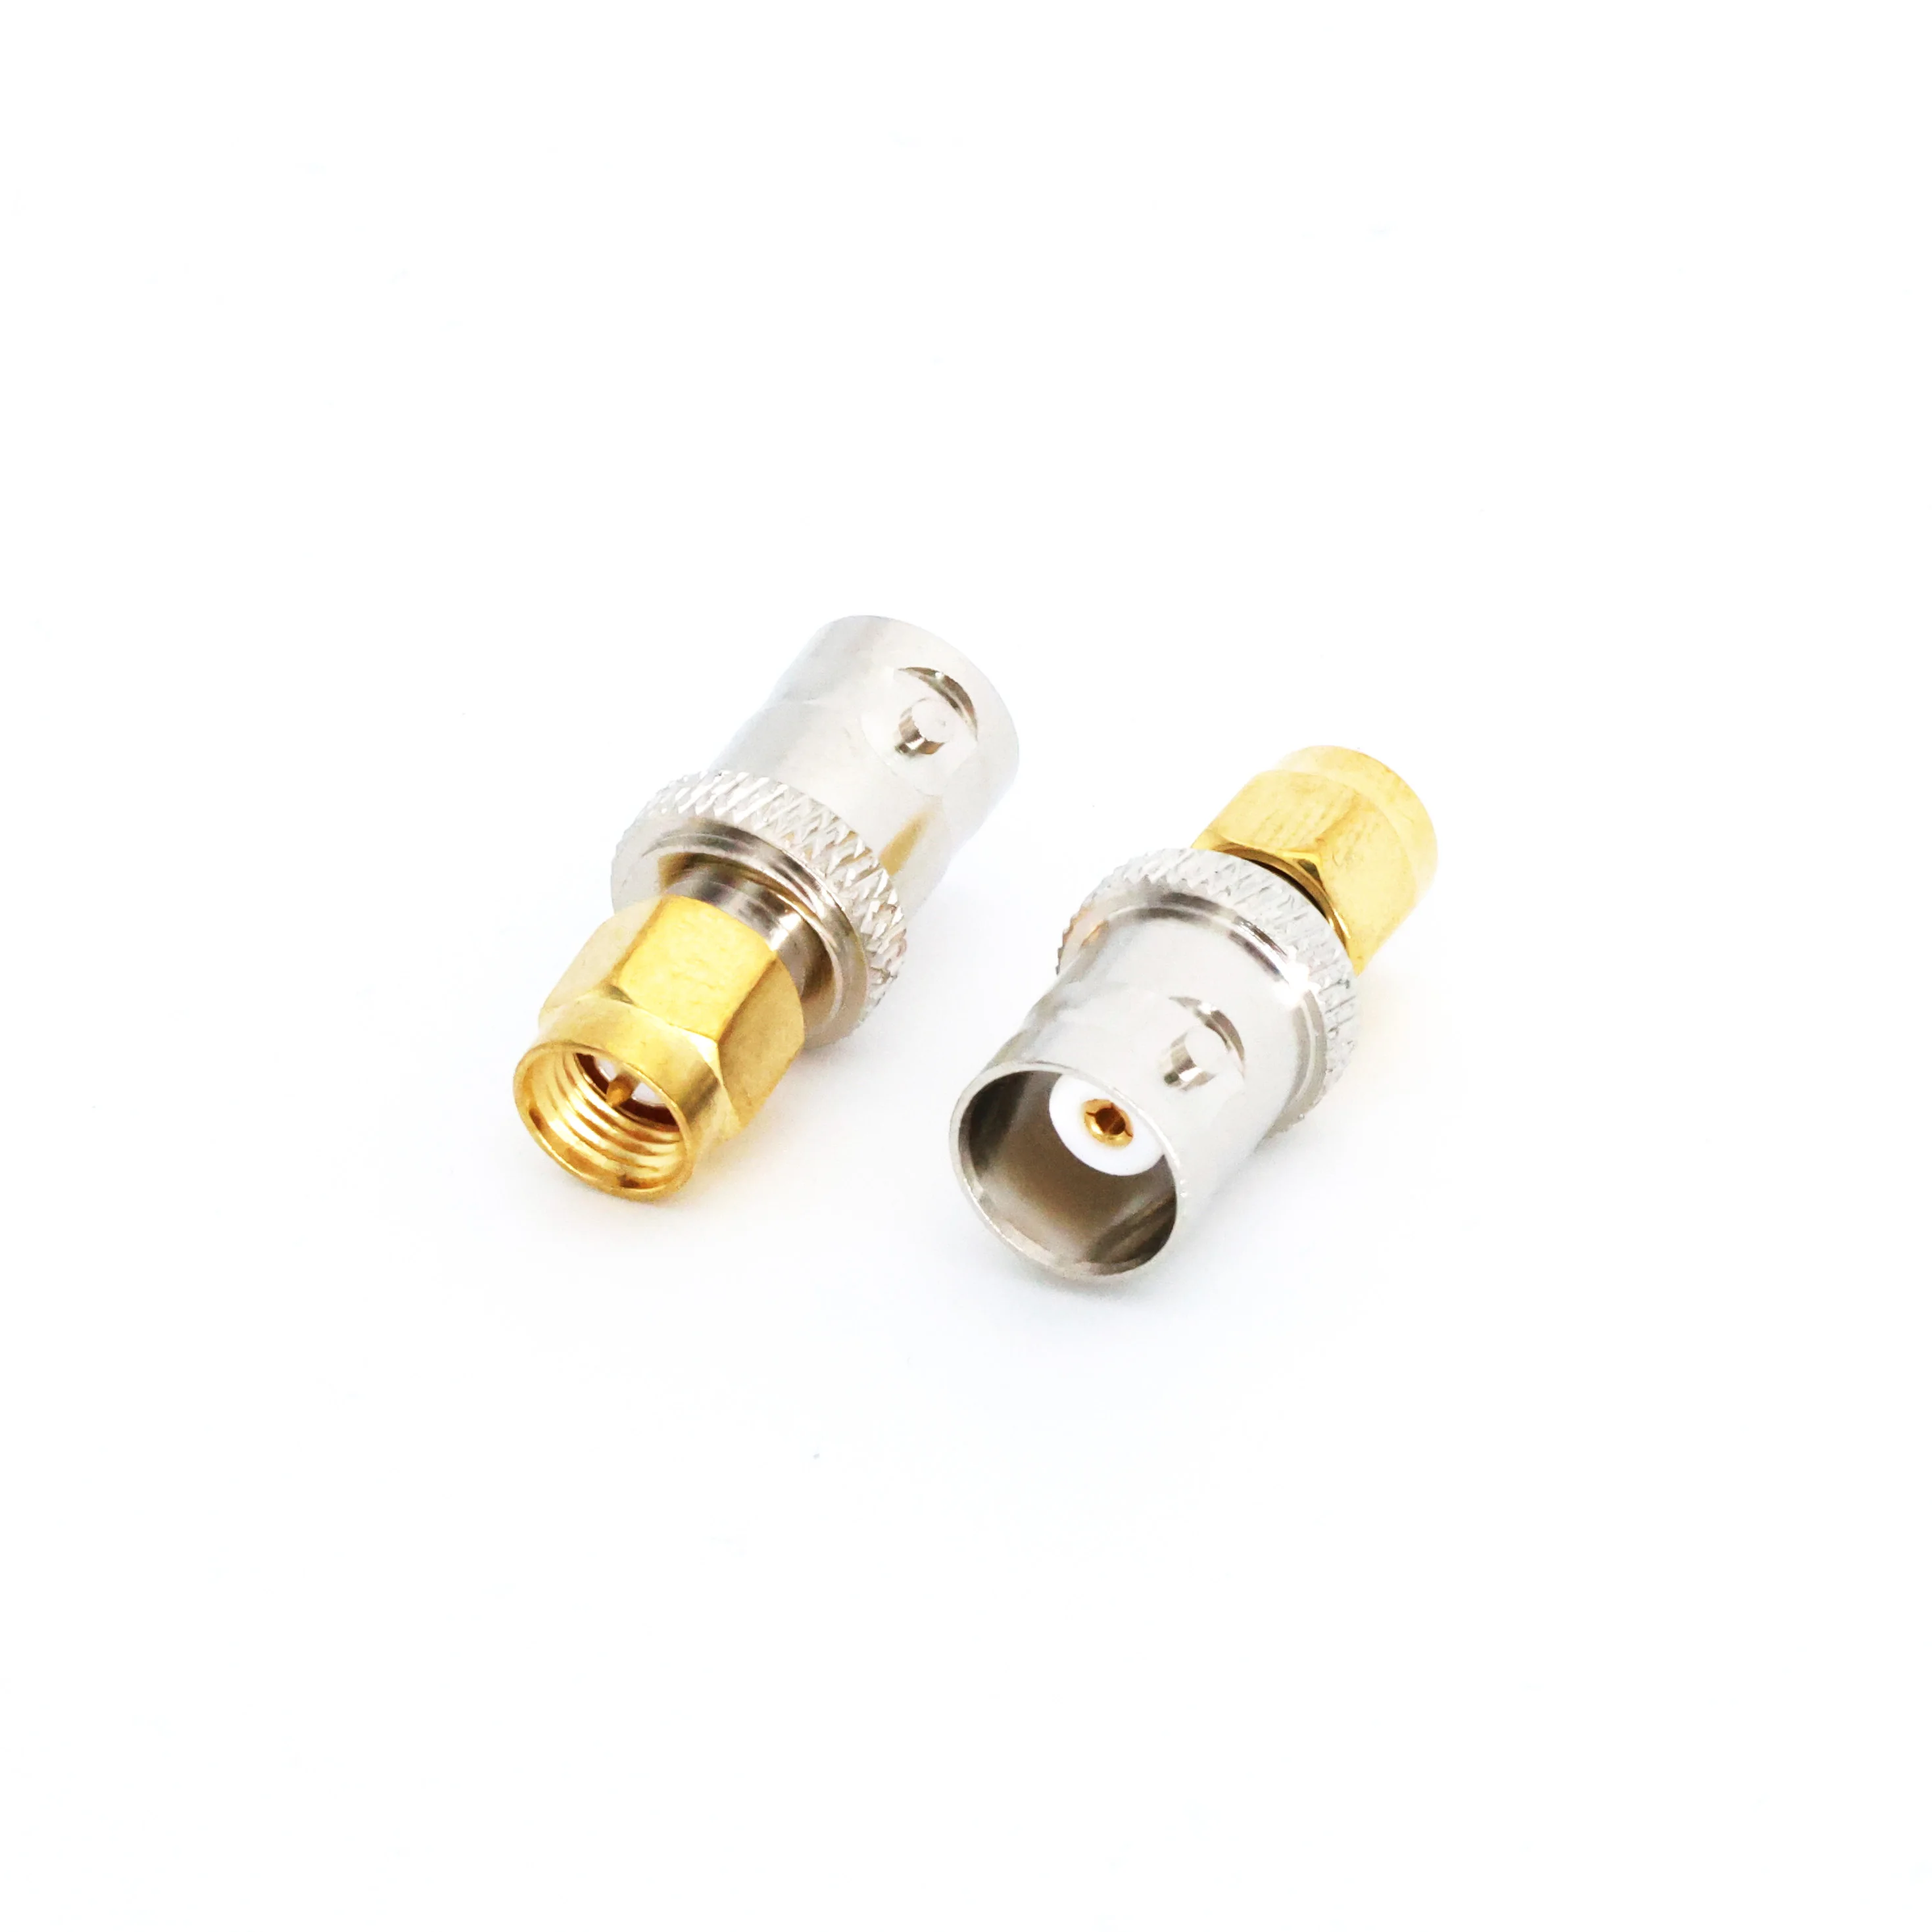 2pcs Coaxial connector SMA to BNC SMA (inner screw inner needle) to BNC female SMA-J/BNC-K adapter